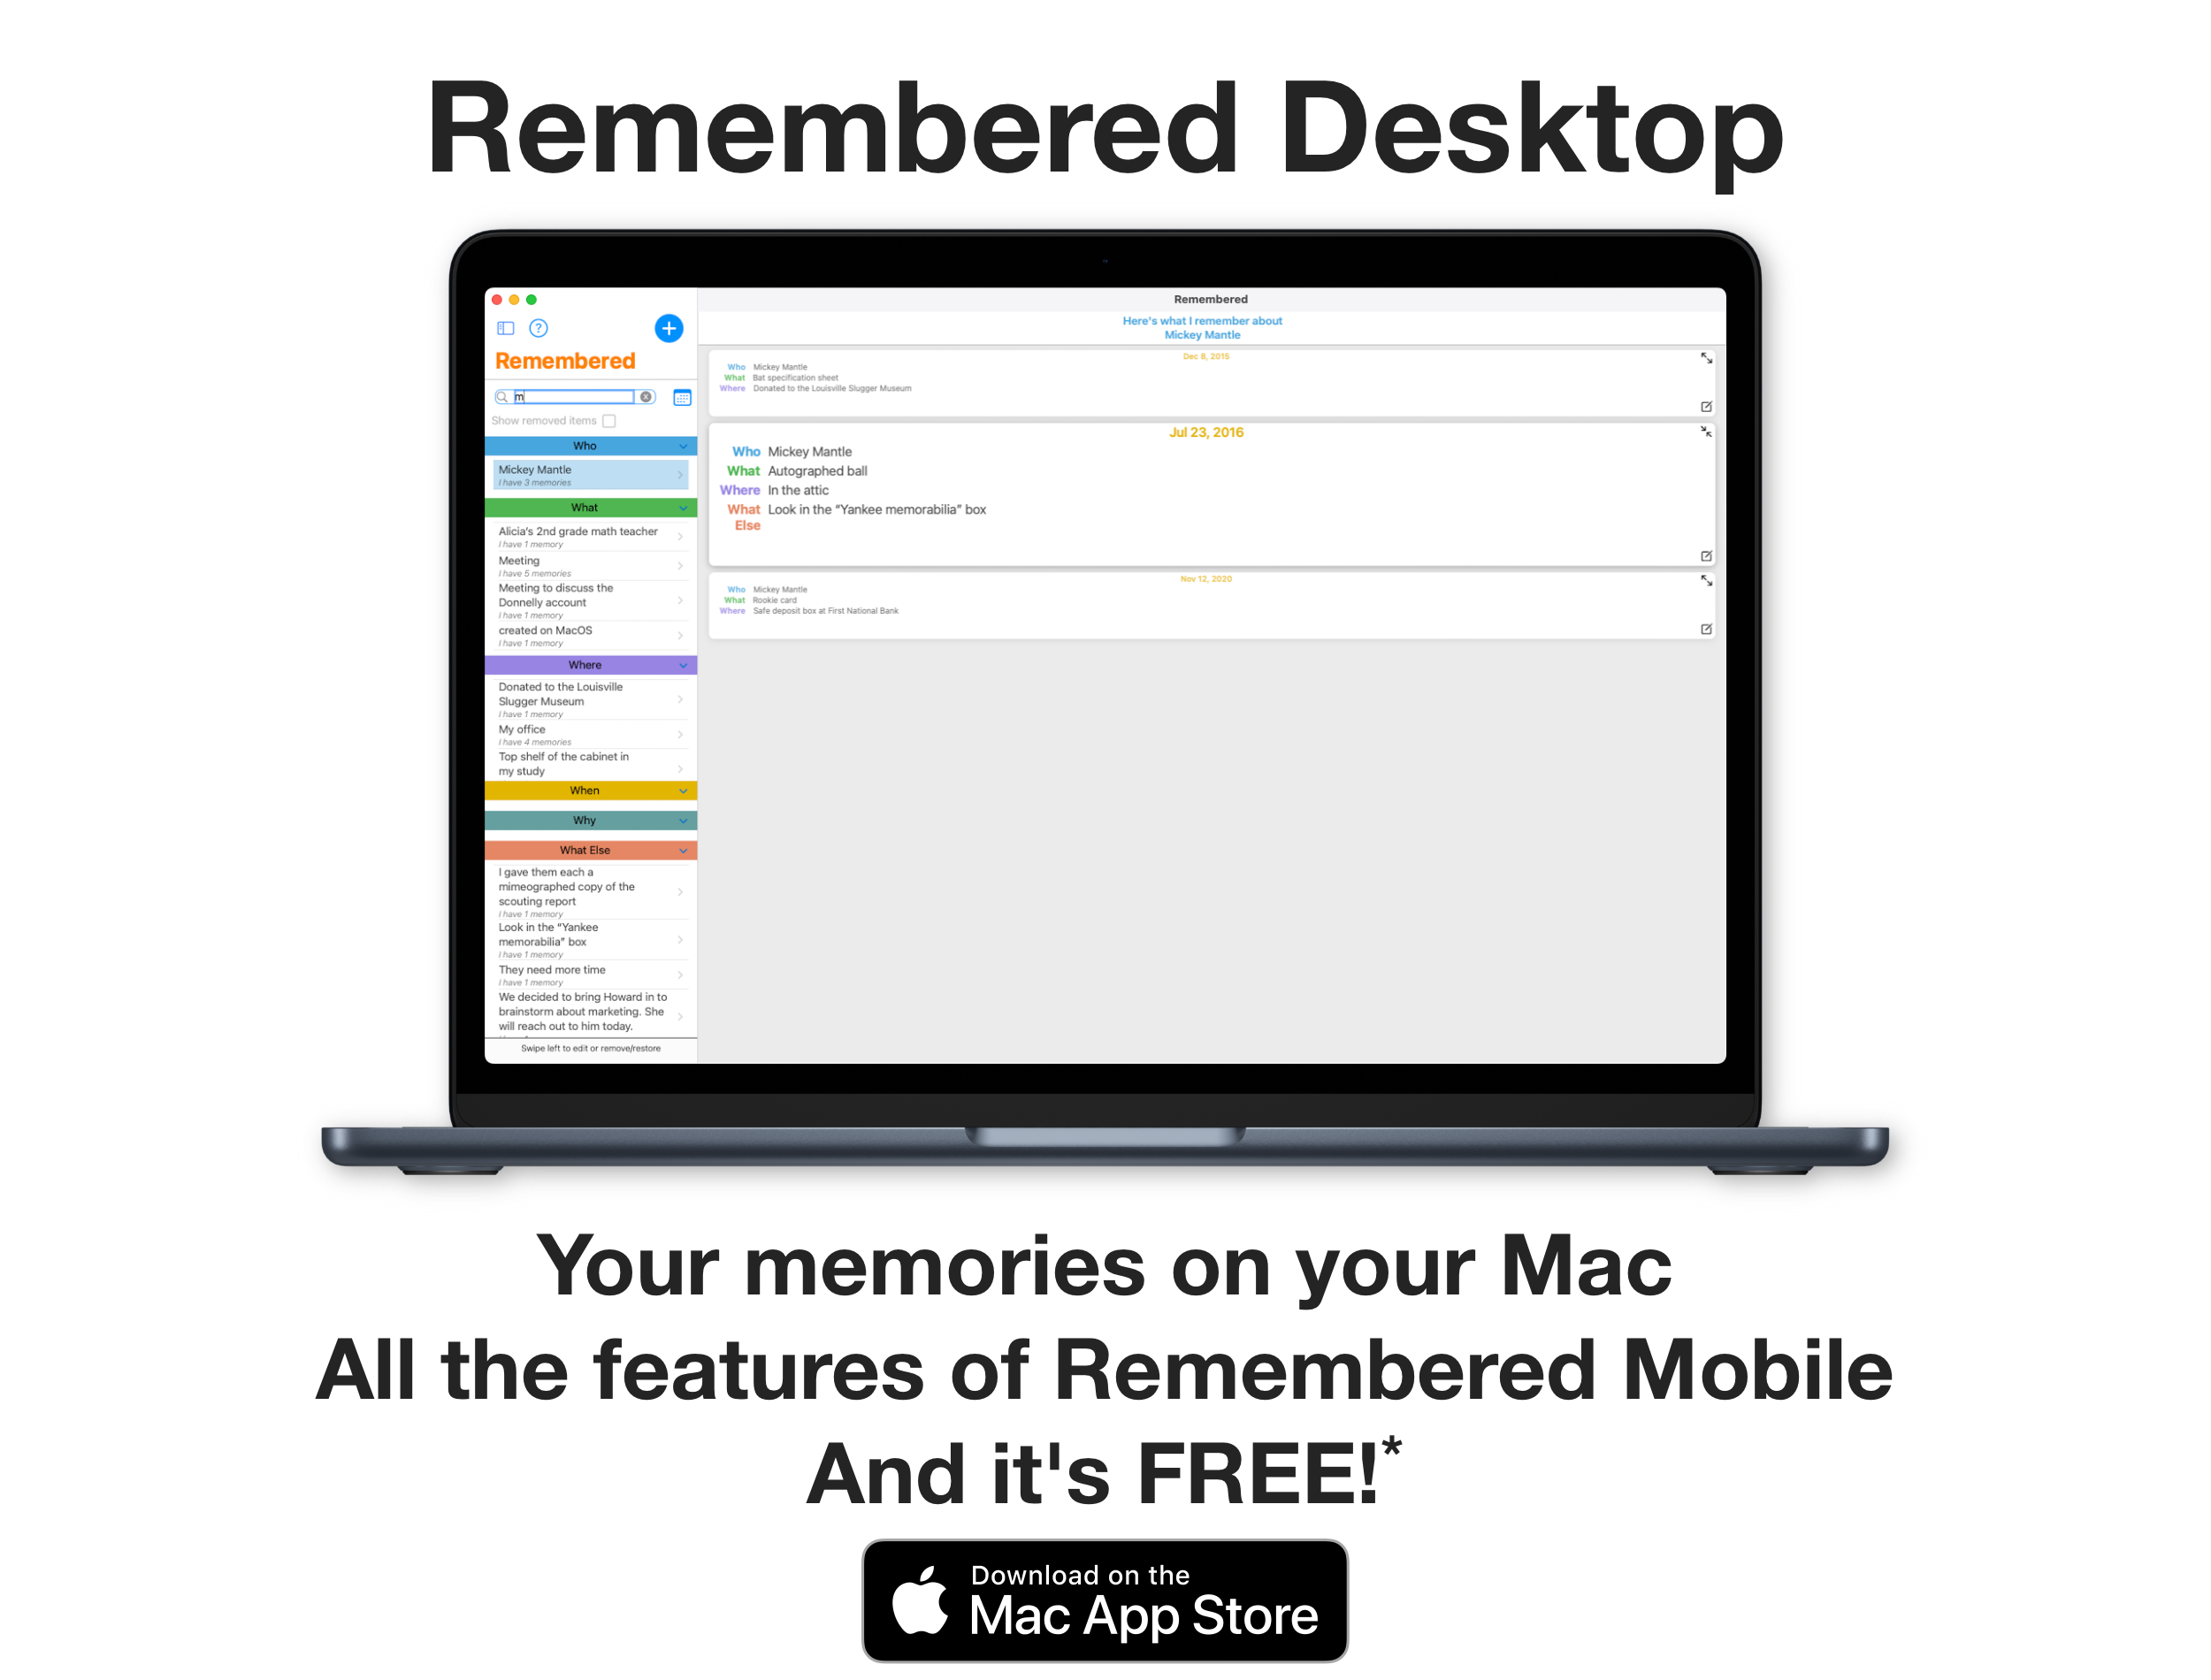 A link to Remembered Desktop on the Apple Mac App Store